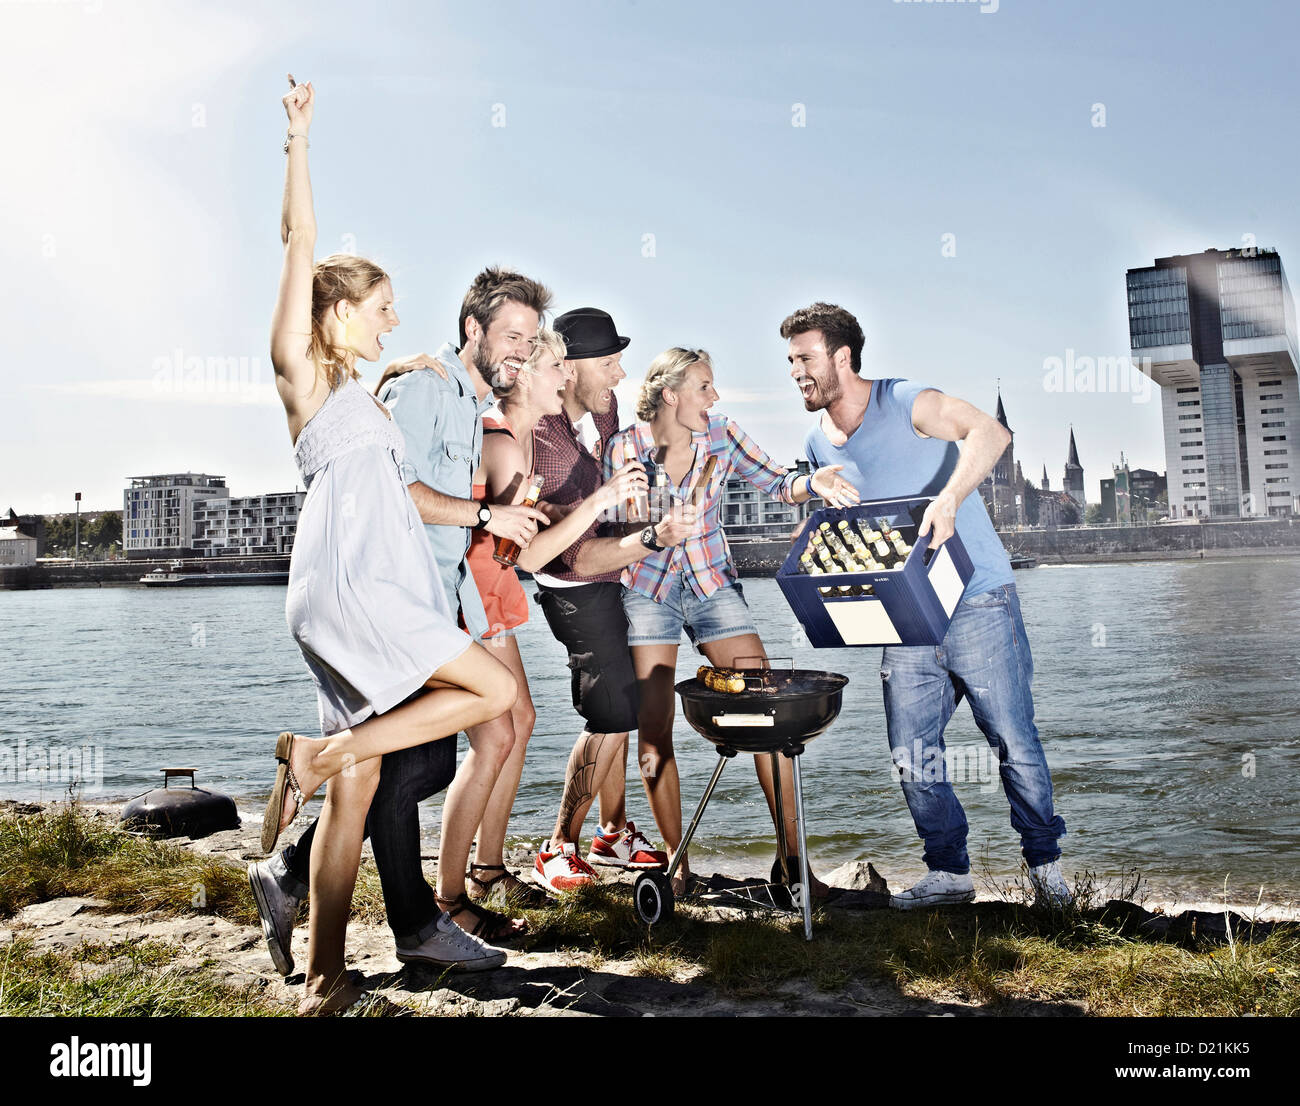 Germany, Cologne, Group of people gathered around barbecue Stock Photo